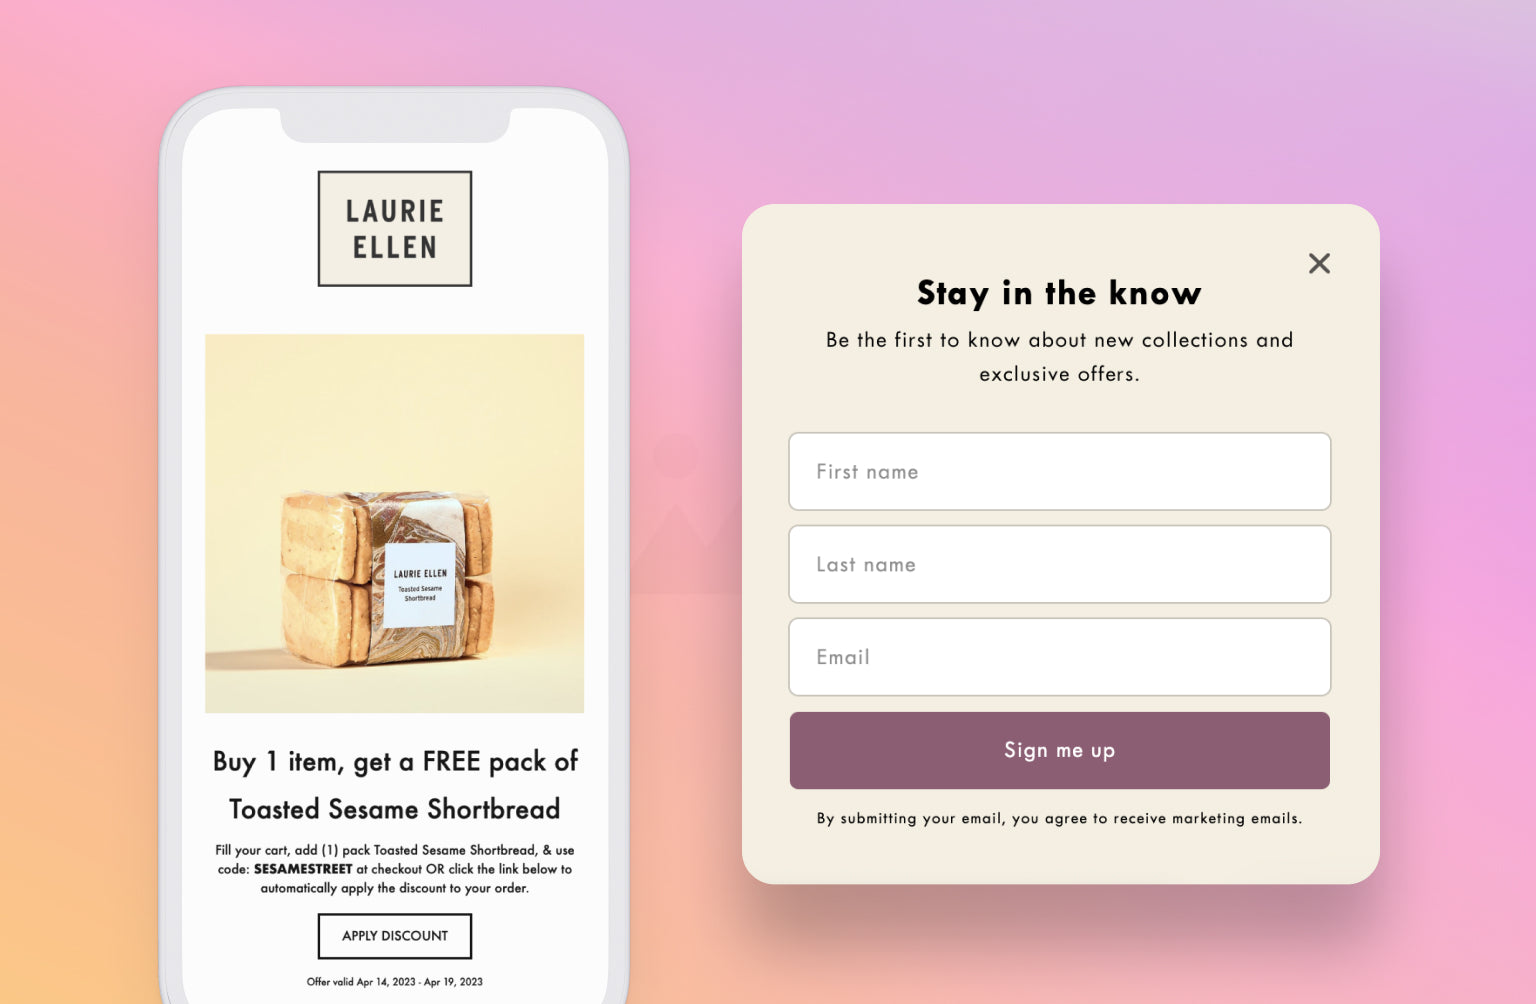 Laurie Ellen has Shopify Forms on her store